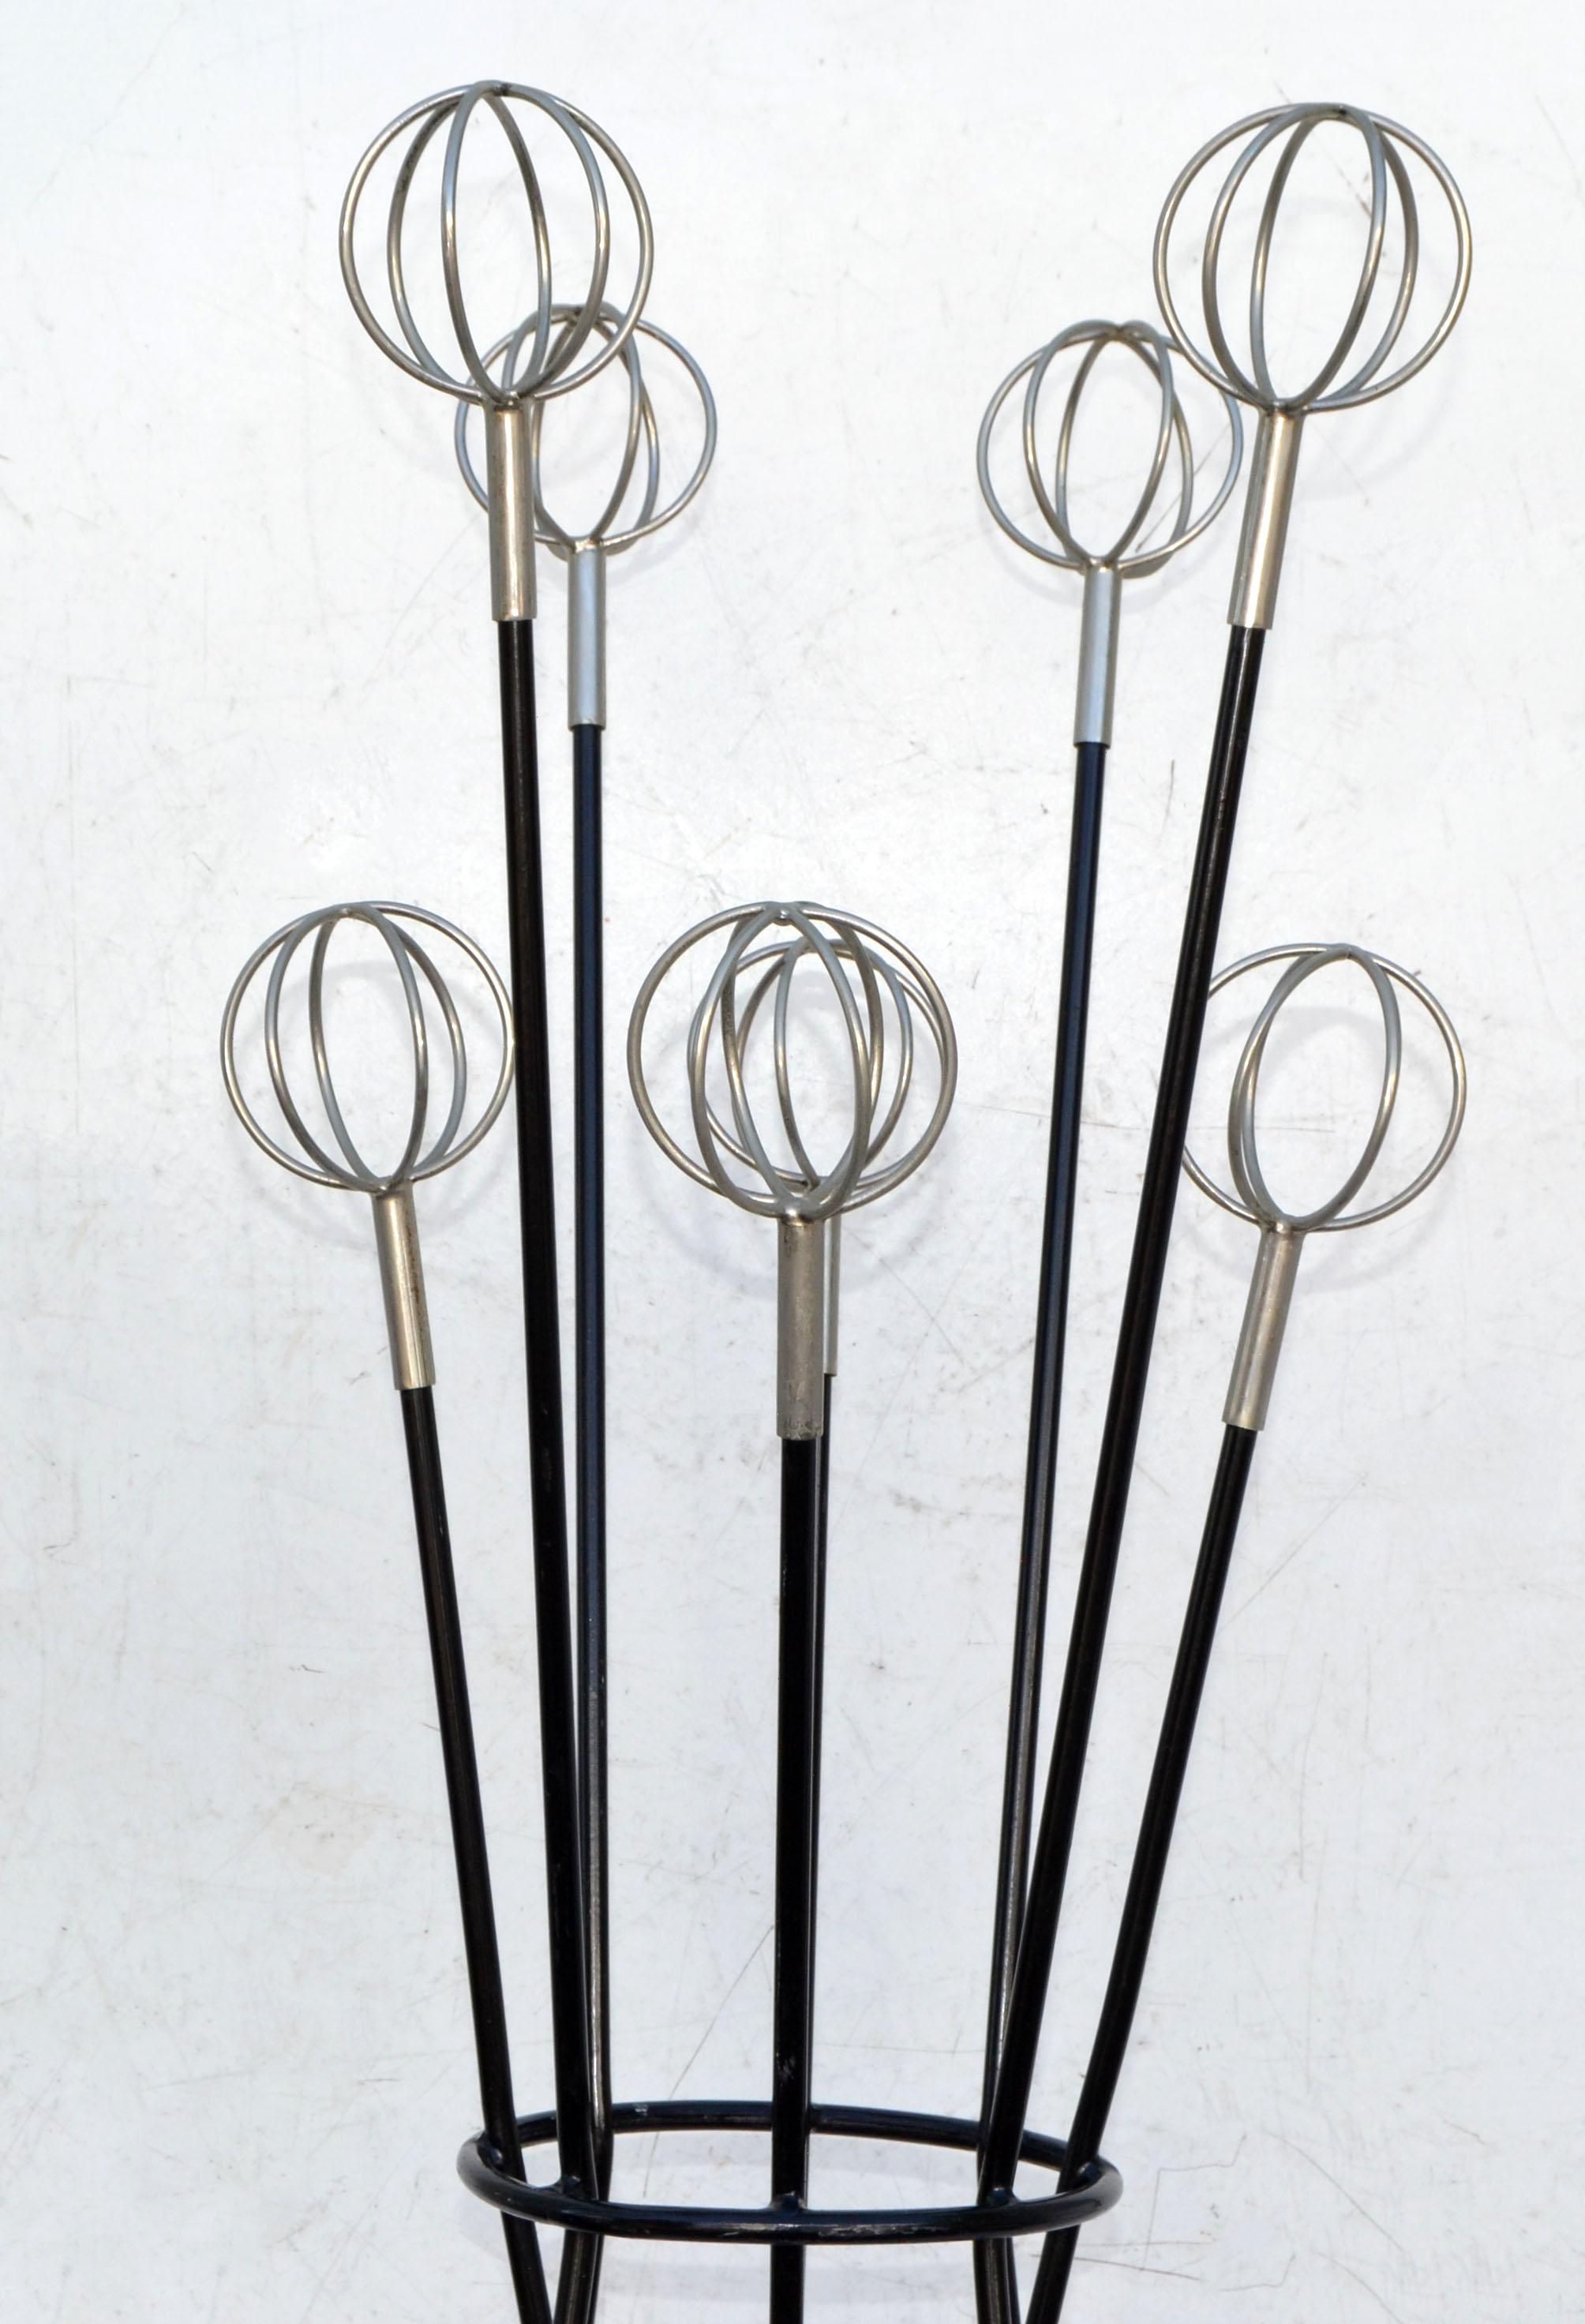 20th Century Roger Feraud French Mid-Century Modern Iron & Nickel Coat Hat Rack Space Age For Sale